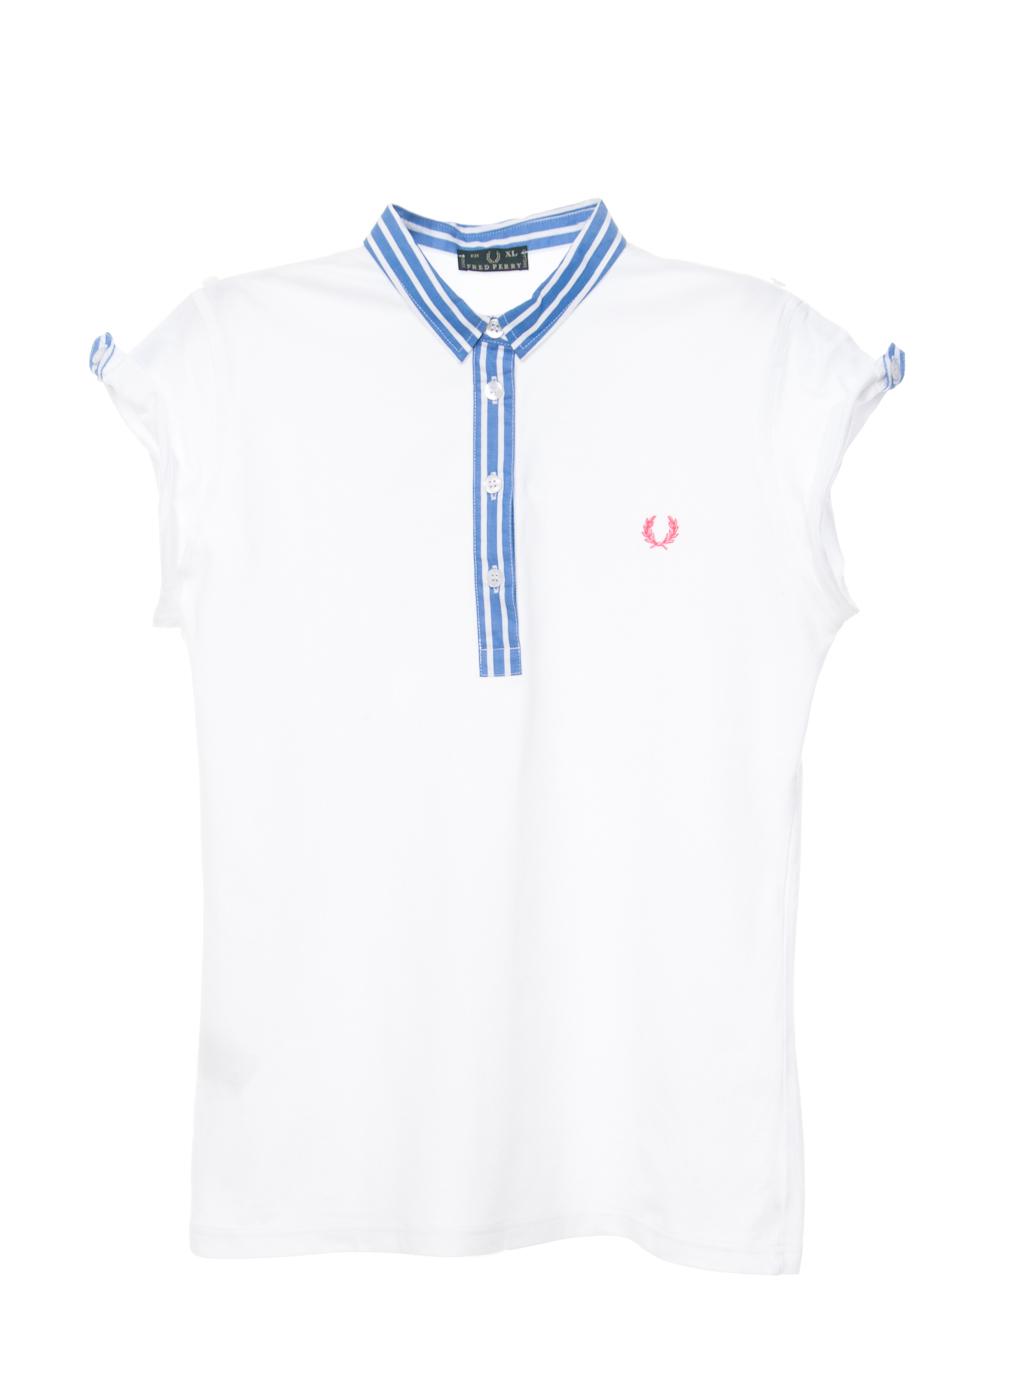 Foto Polo Fred Perry Rayas foto 289451